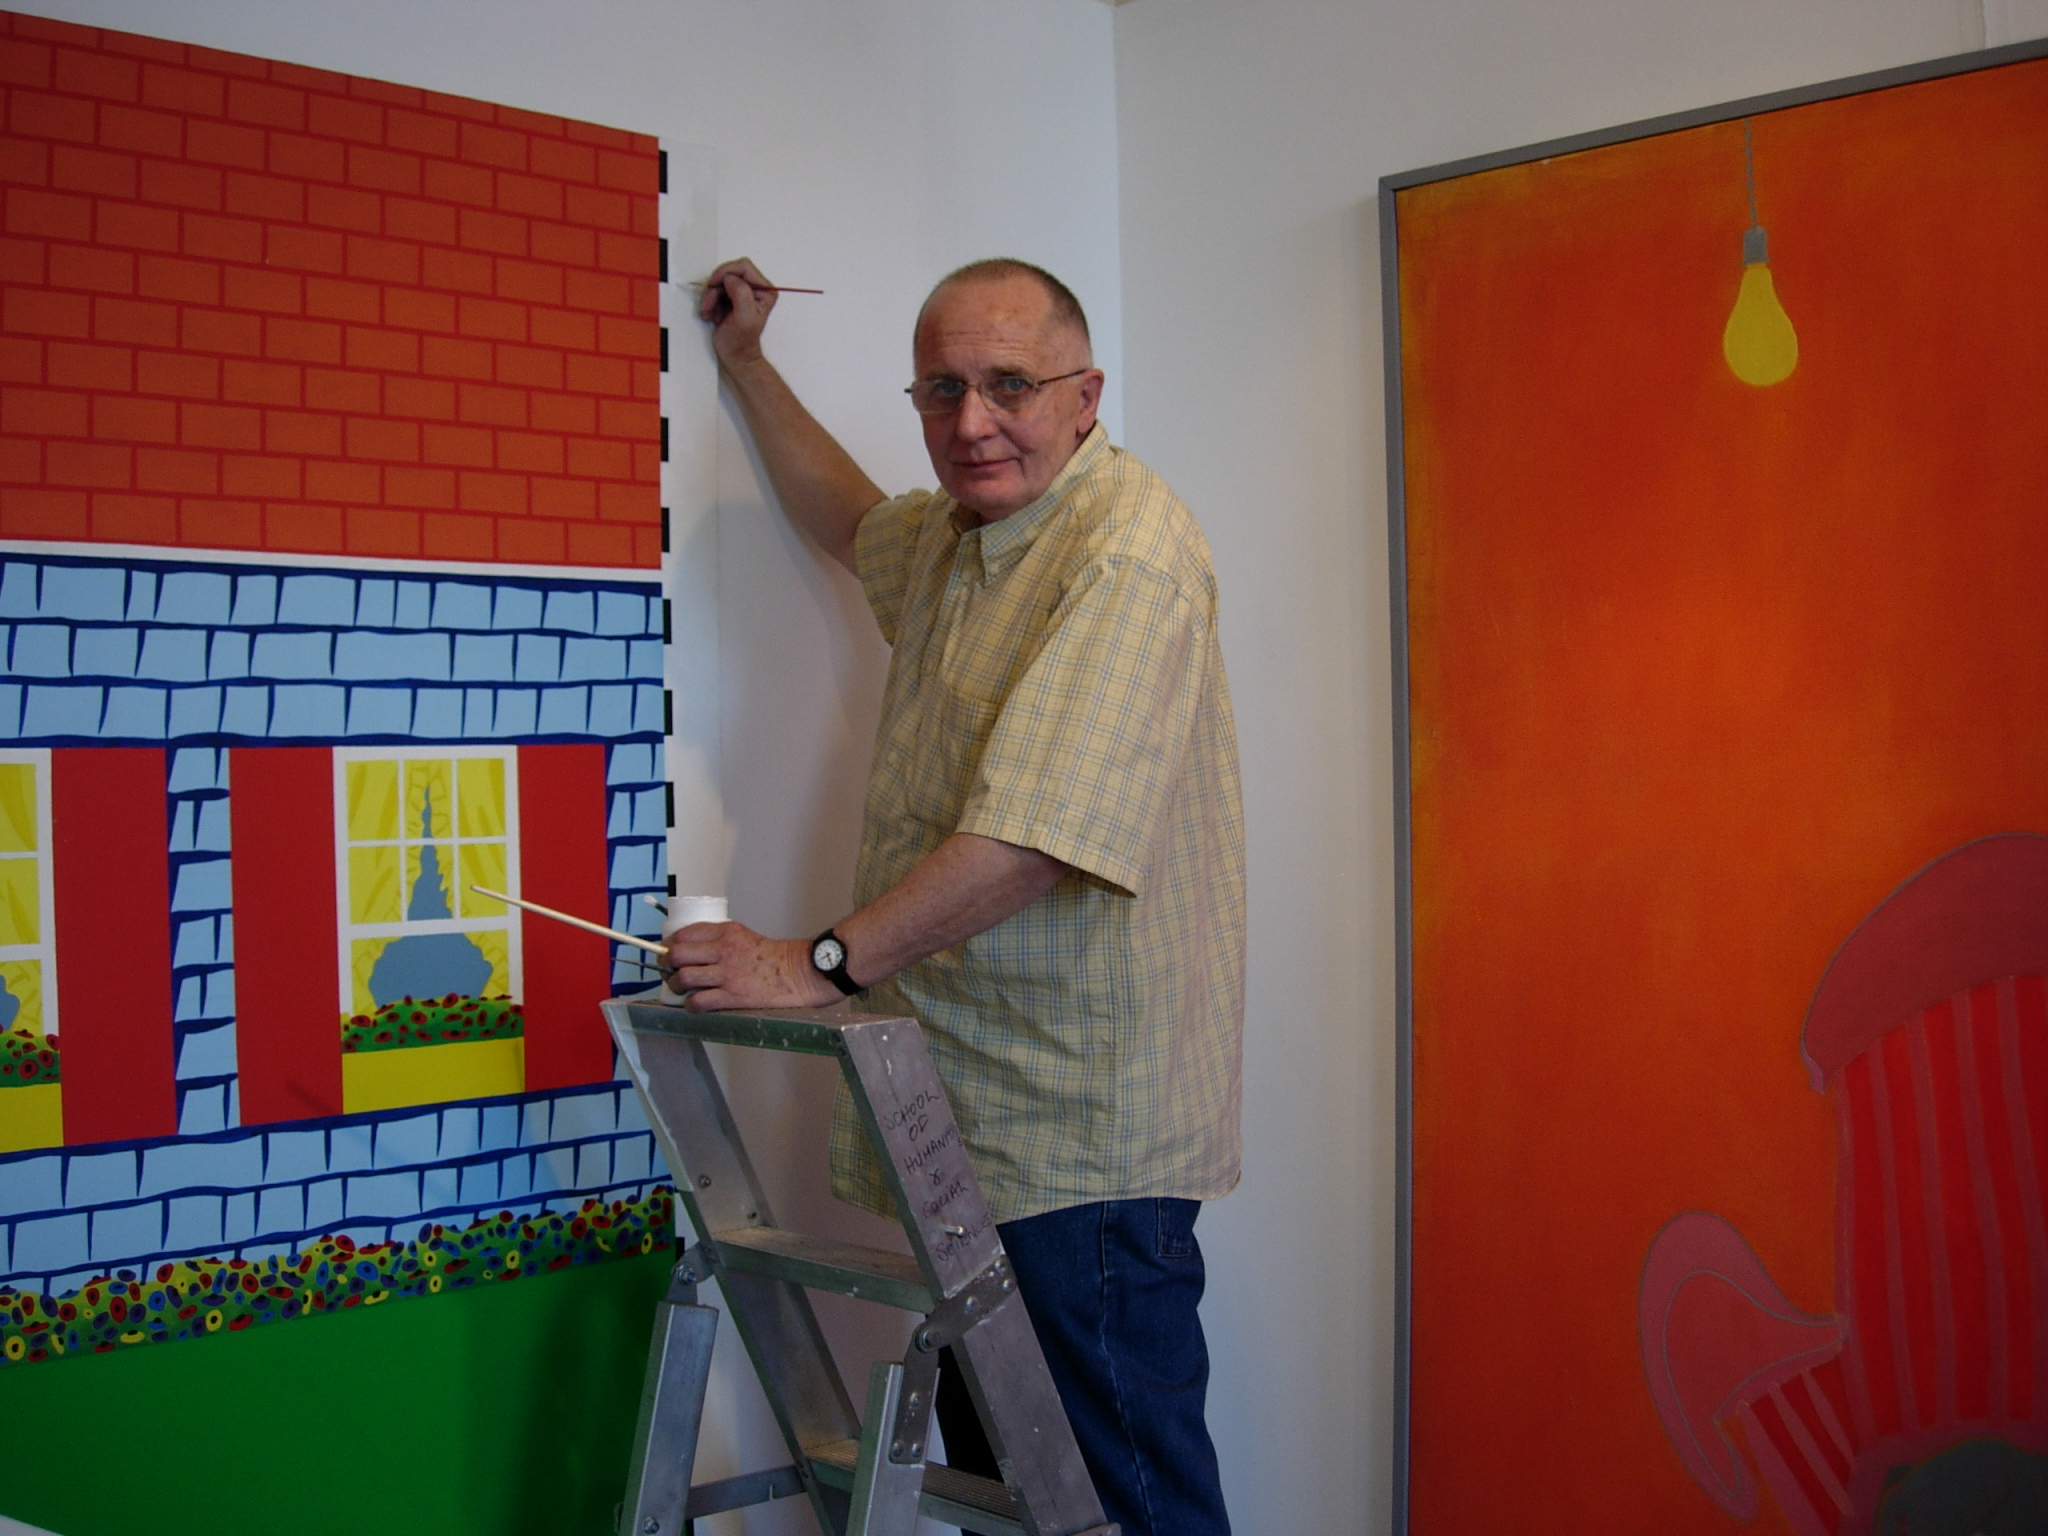 Ken Elias retouching his painting 'Days are where we live' hung alongside an Ernest Zobole painting, Zobole Gallery 2006